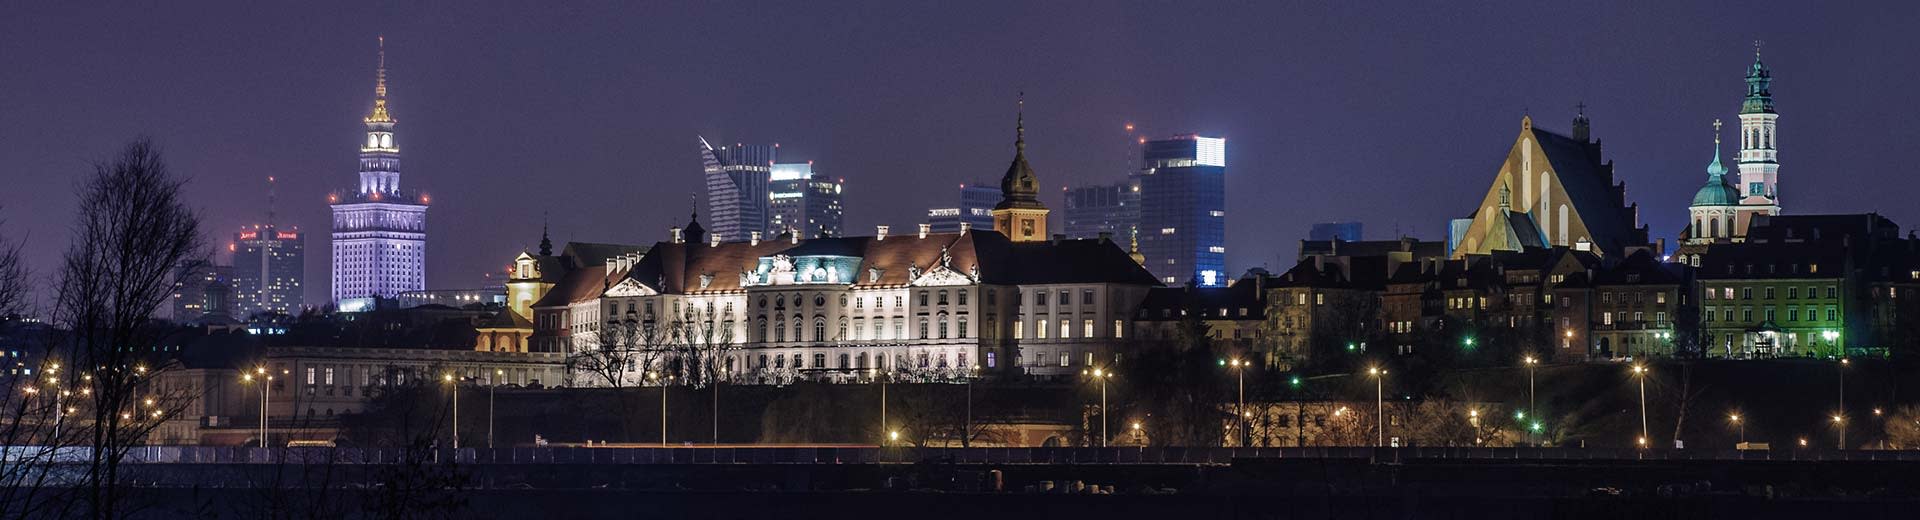 The famous Warsaw Palace of Culture and Science dominates the background, while in front are low-rise Polish apartments.